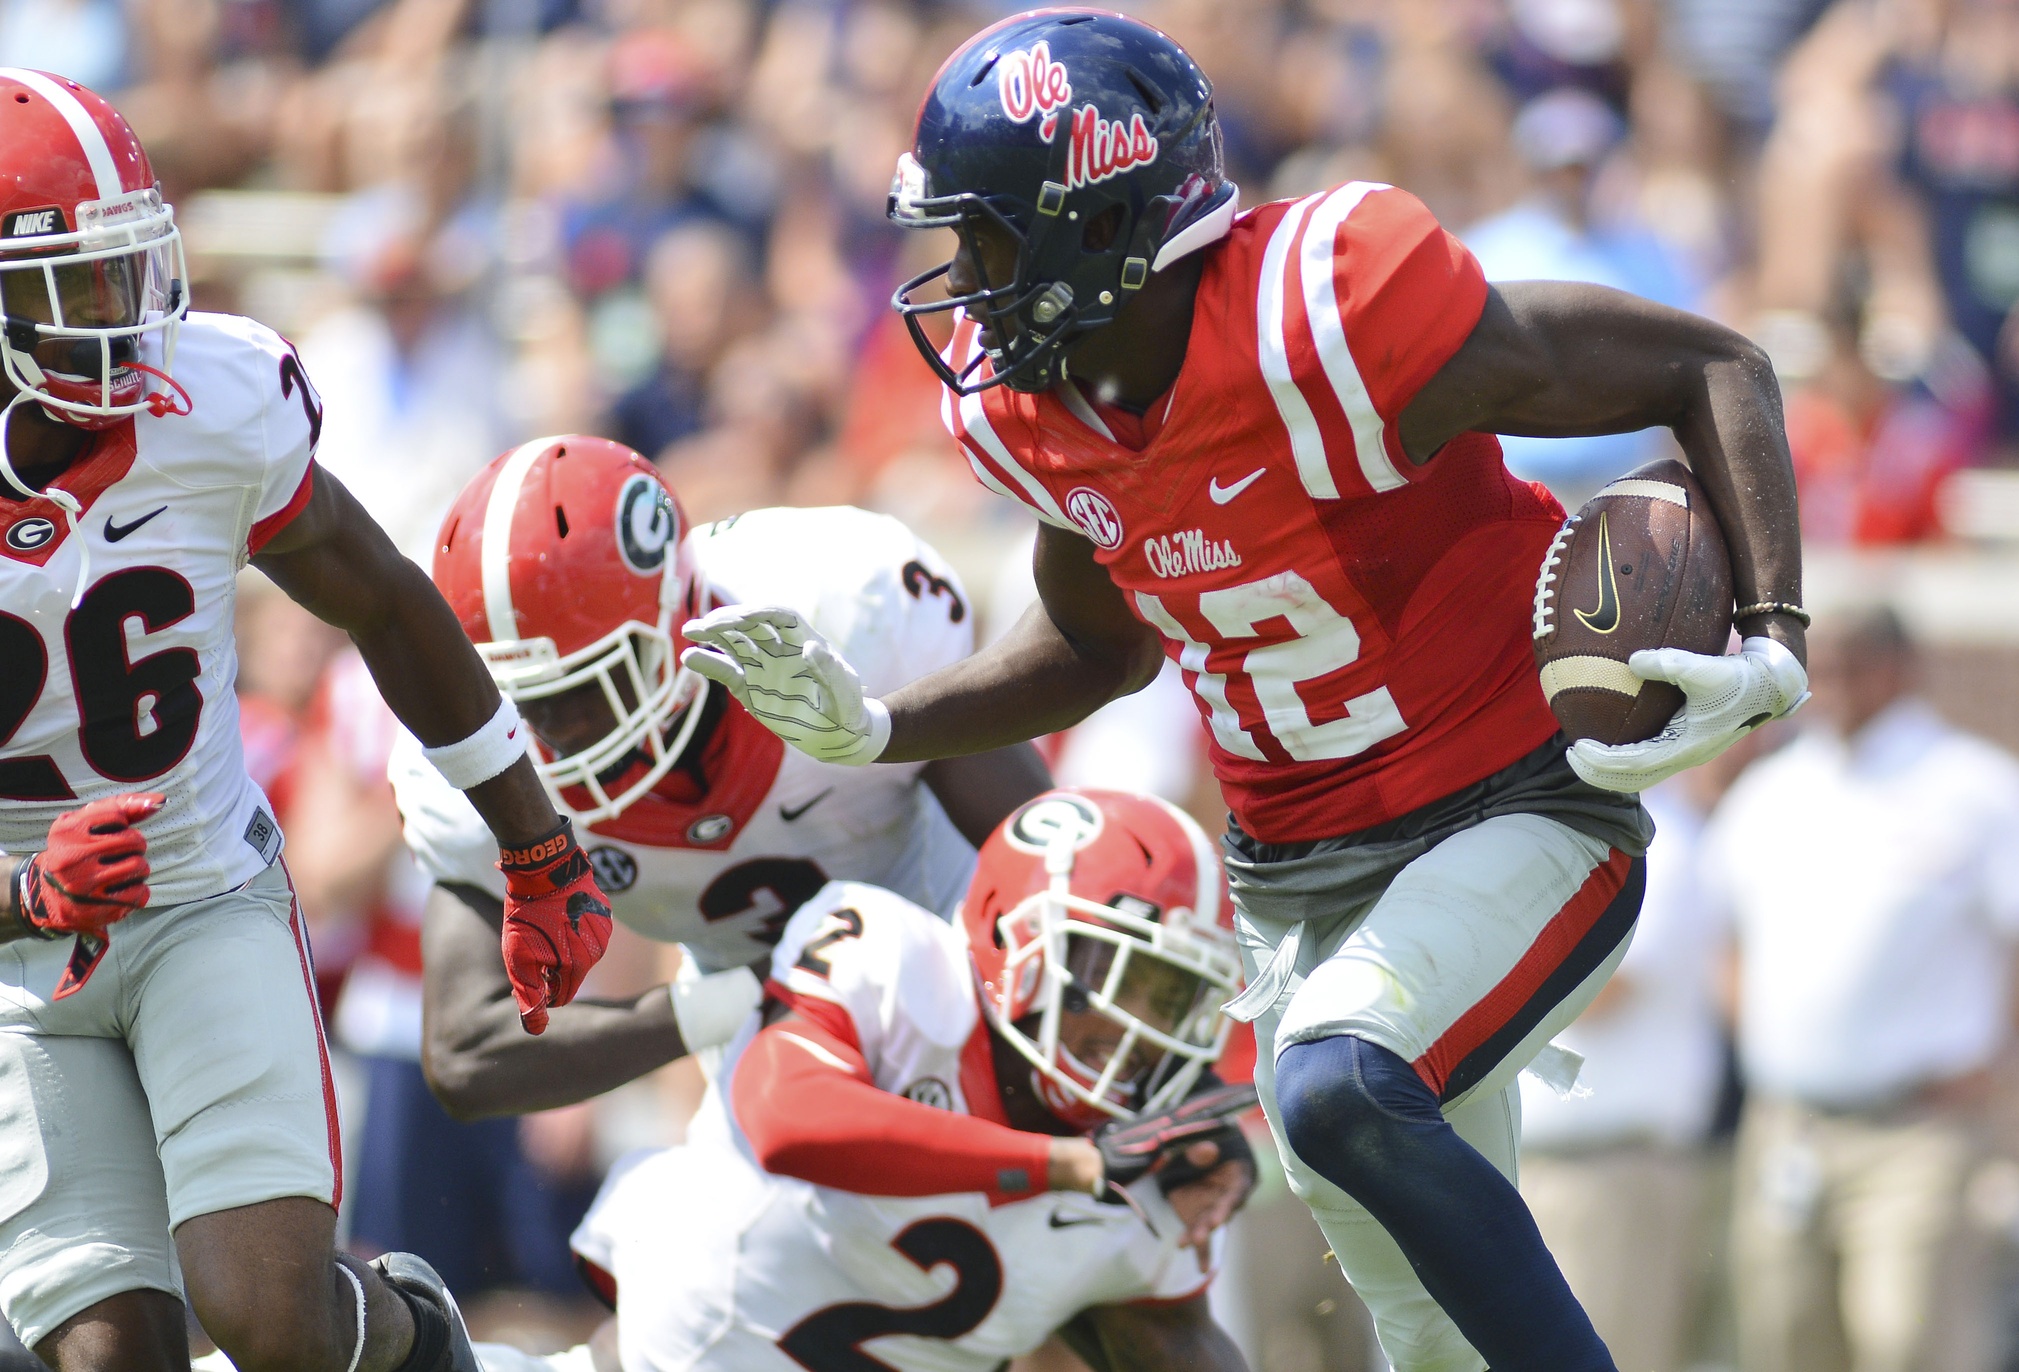 Sep 24, 2016; Oxford, MS, USA; Mississippi Rebels wide receiver Van Jefferson (12) returns a punt during the third quarter of the game against the Georgia Bulldogs at Vaught-Hemingway Stadium. Mississippi won 45-14. Mandatory Credit: Matt Bush-USA TODAY Sports